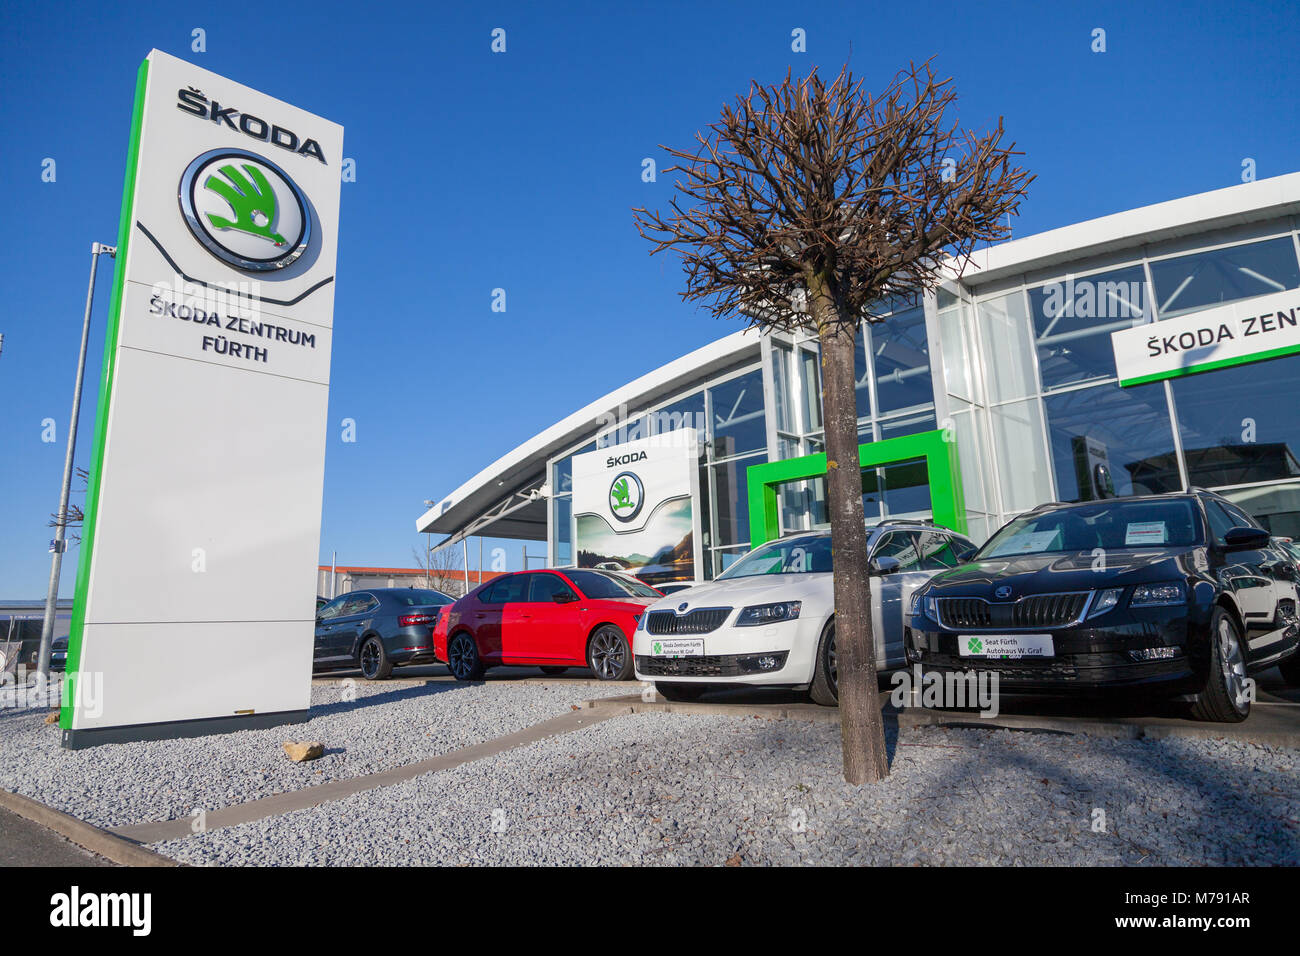 NUERNBERG / GERMANY - MARCH 4, 2018: Skoda logo on a car dealer in Germany. Skoda is a Czech automobile manufacturer founded in 1895 as Laurin and Kle Stock Photo